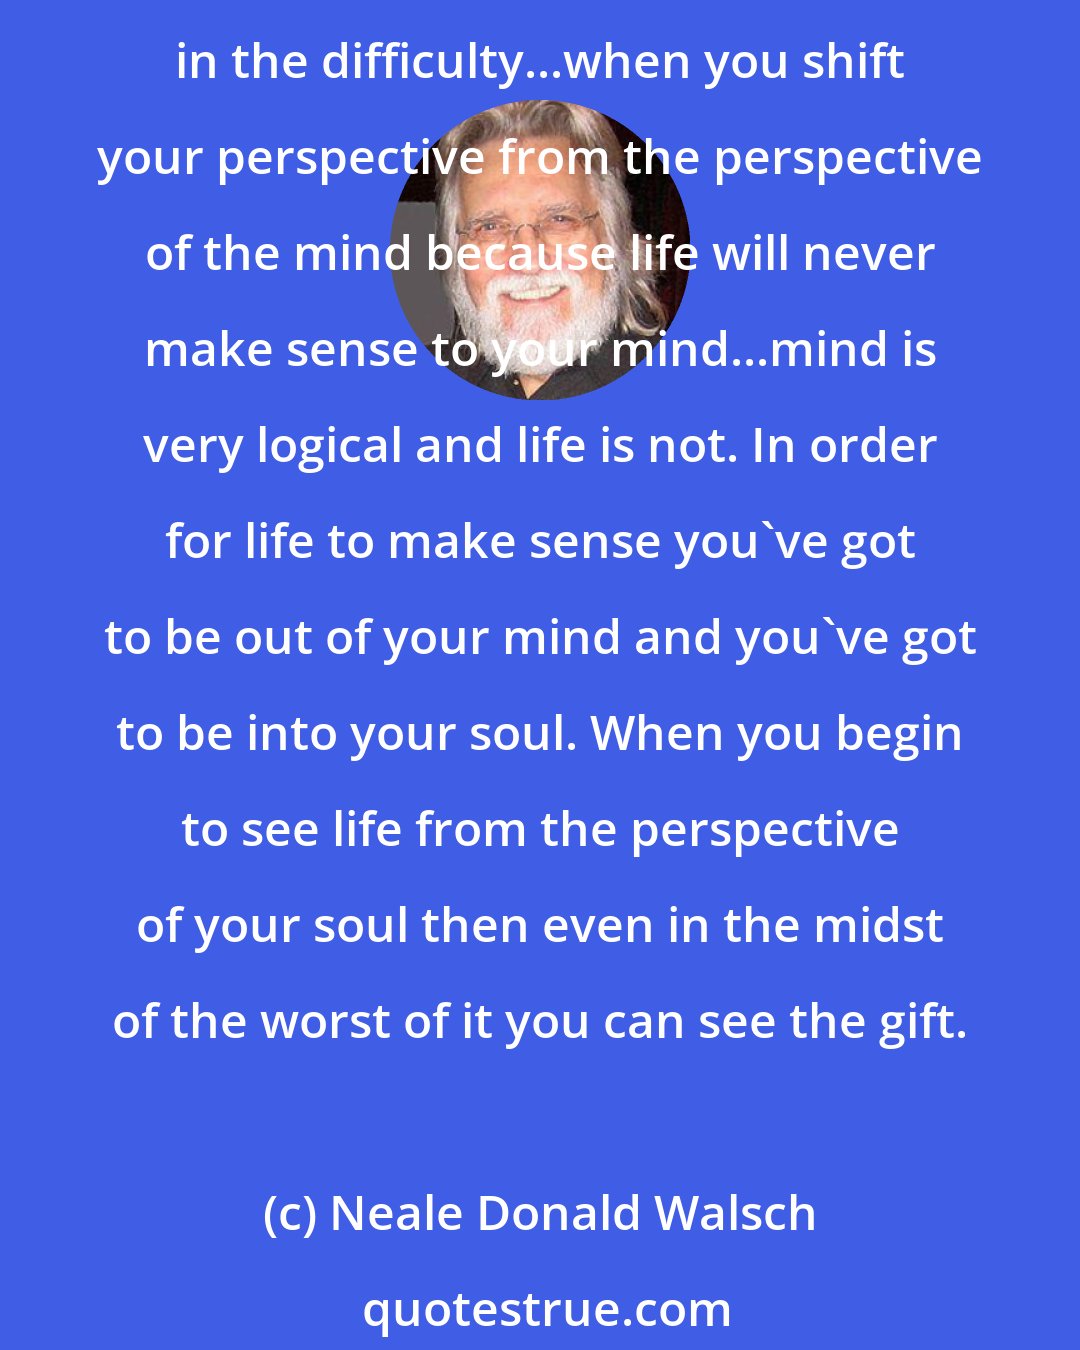 Neale Donald Walsch: The first step of gratitude is to see the gift...if you are in the middle of difficulties and problems, how can you feel gratitude? You've got to fight to find the gift even in the difficulty...when you shift your perspective from the perspective of the mind because life will never make sense to your mind...mind is very logical and life is not. In order for life to make sense you've got to be out of your mind and you've got to be into your soul. When you begin to see life from the perspective of your soul then even in the midst of the worst of it you can see the gift.